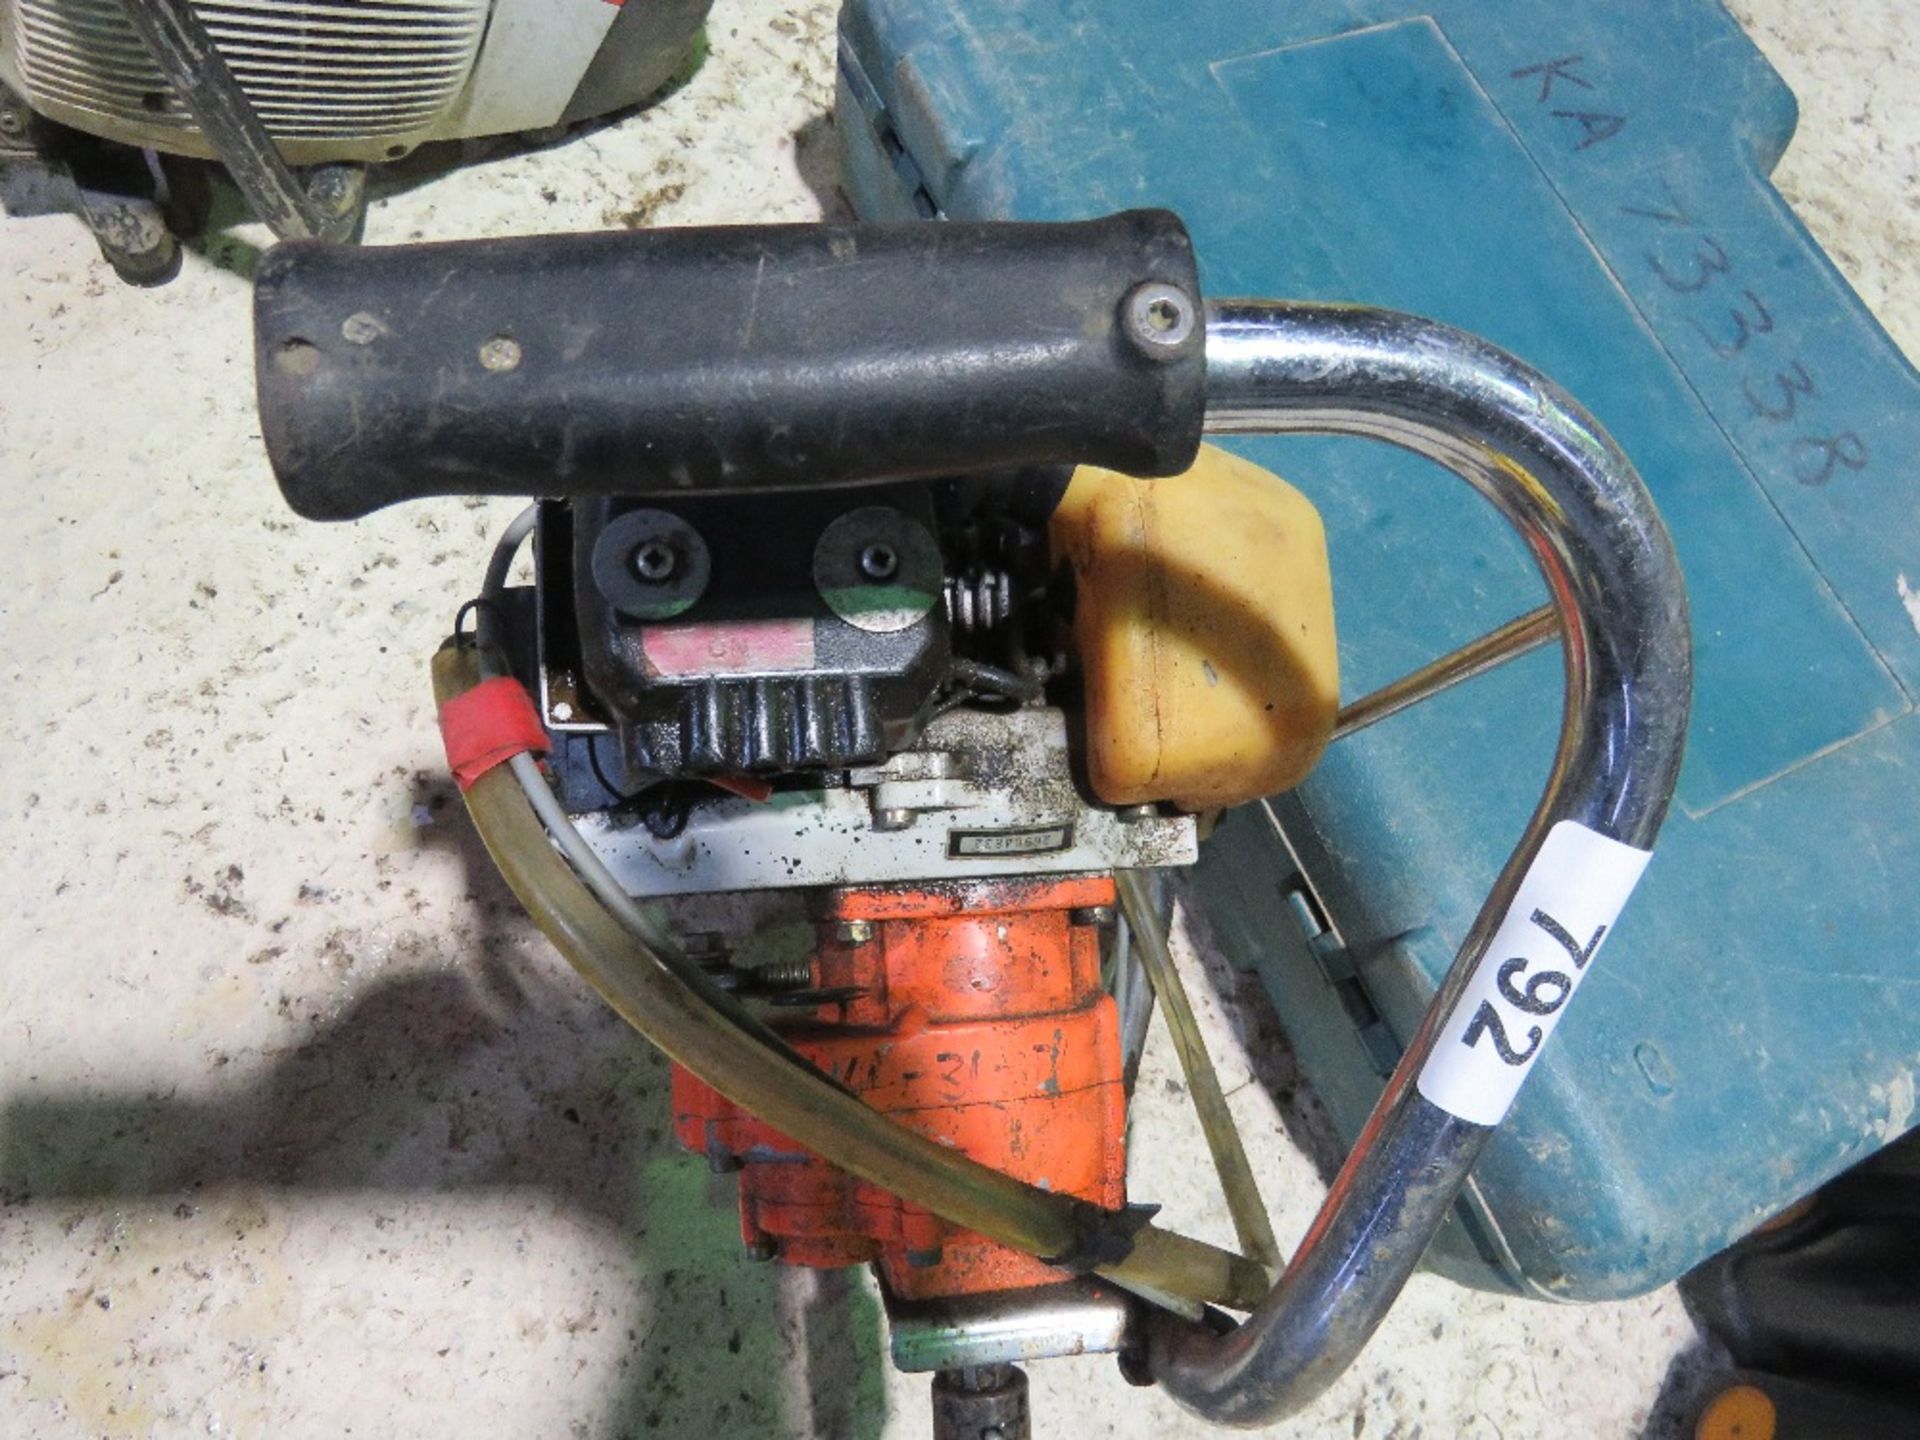 STIHL PETROL ENGINED POST HOLE BORER. SOURCED FROM LOCAL DEPOT CLOSURE. - Image 3 of 6